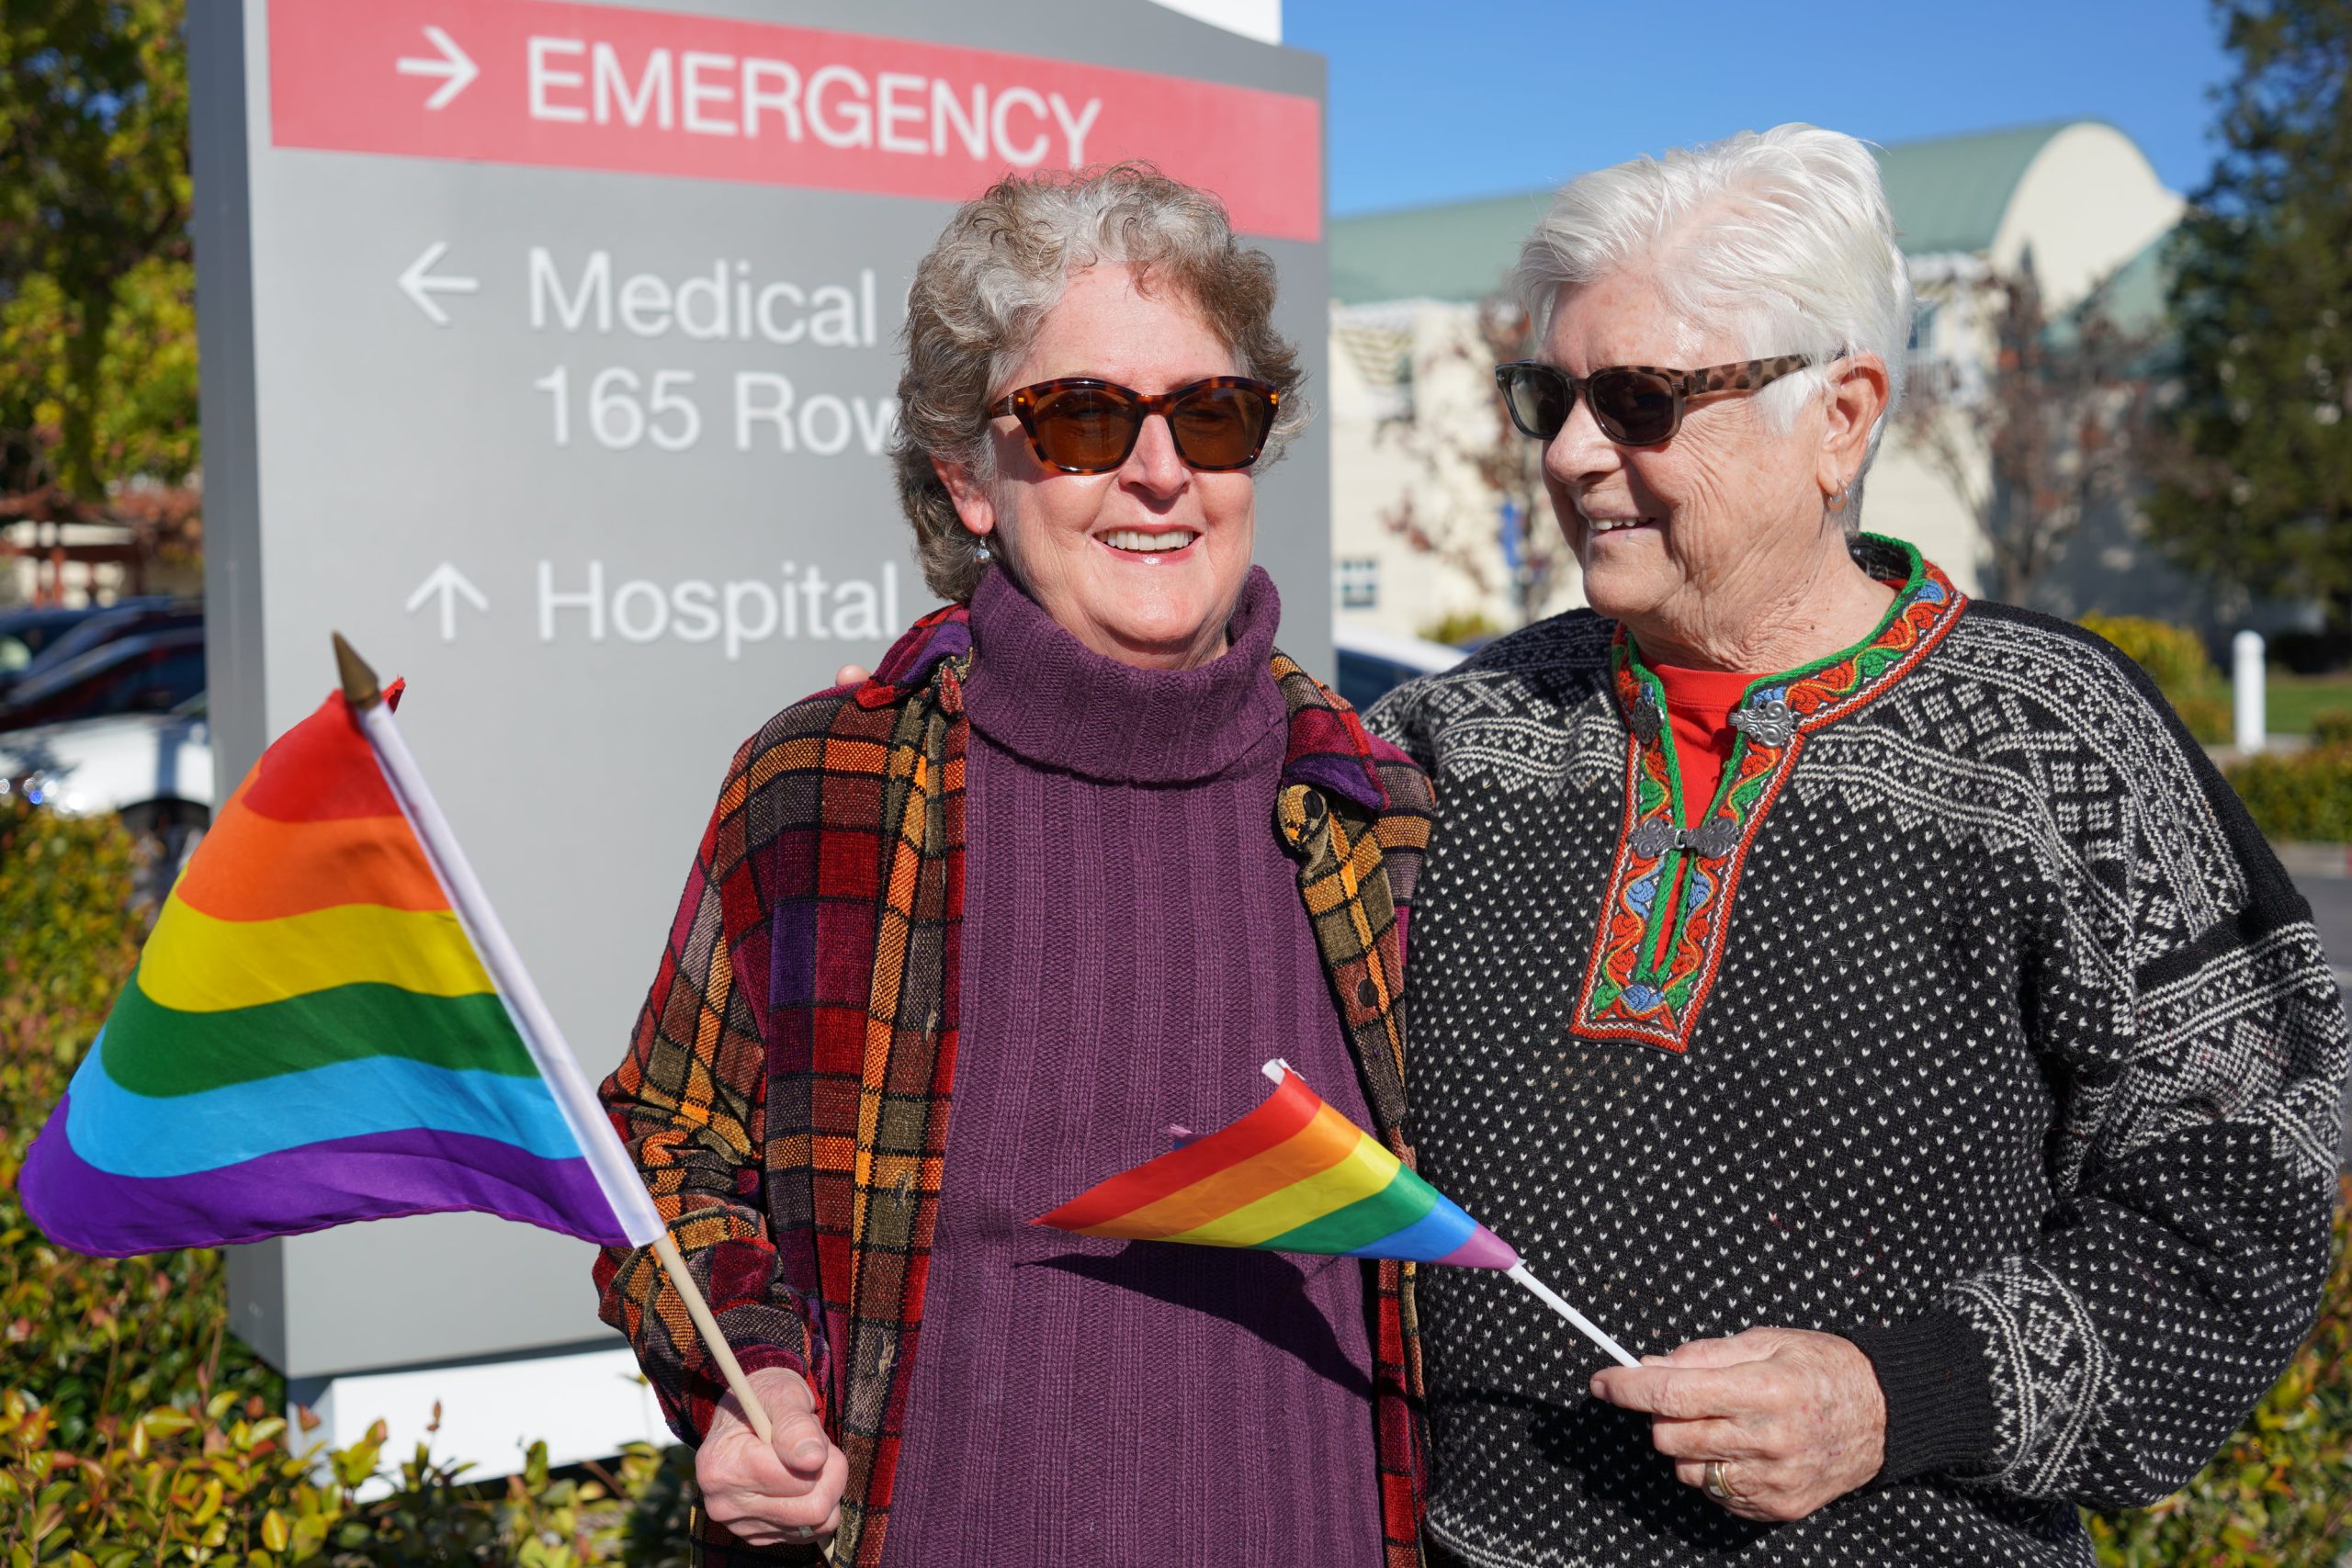 Lolma Olson (pictured left) and Beth Reed (pictured right) stand in front of the hospital emergency entrance sign while holding rainbow flags in support of the LGBTQ community.